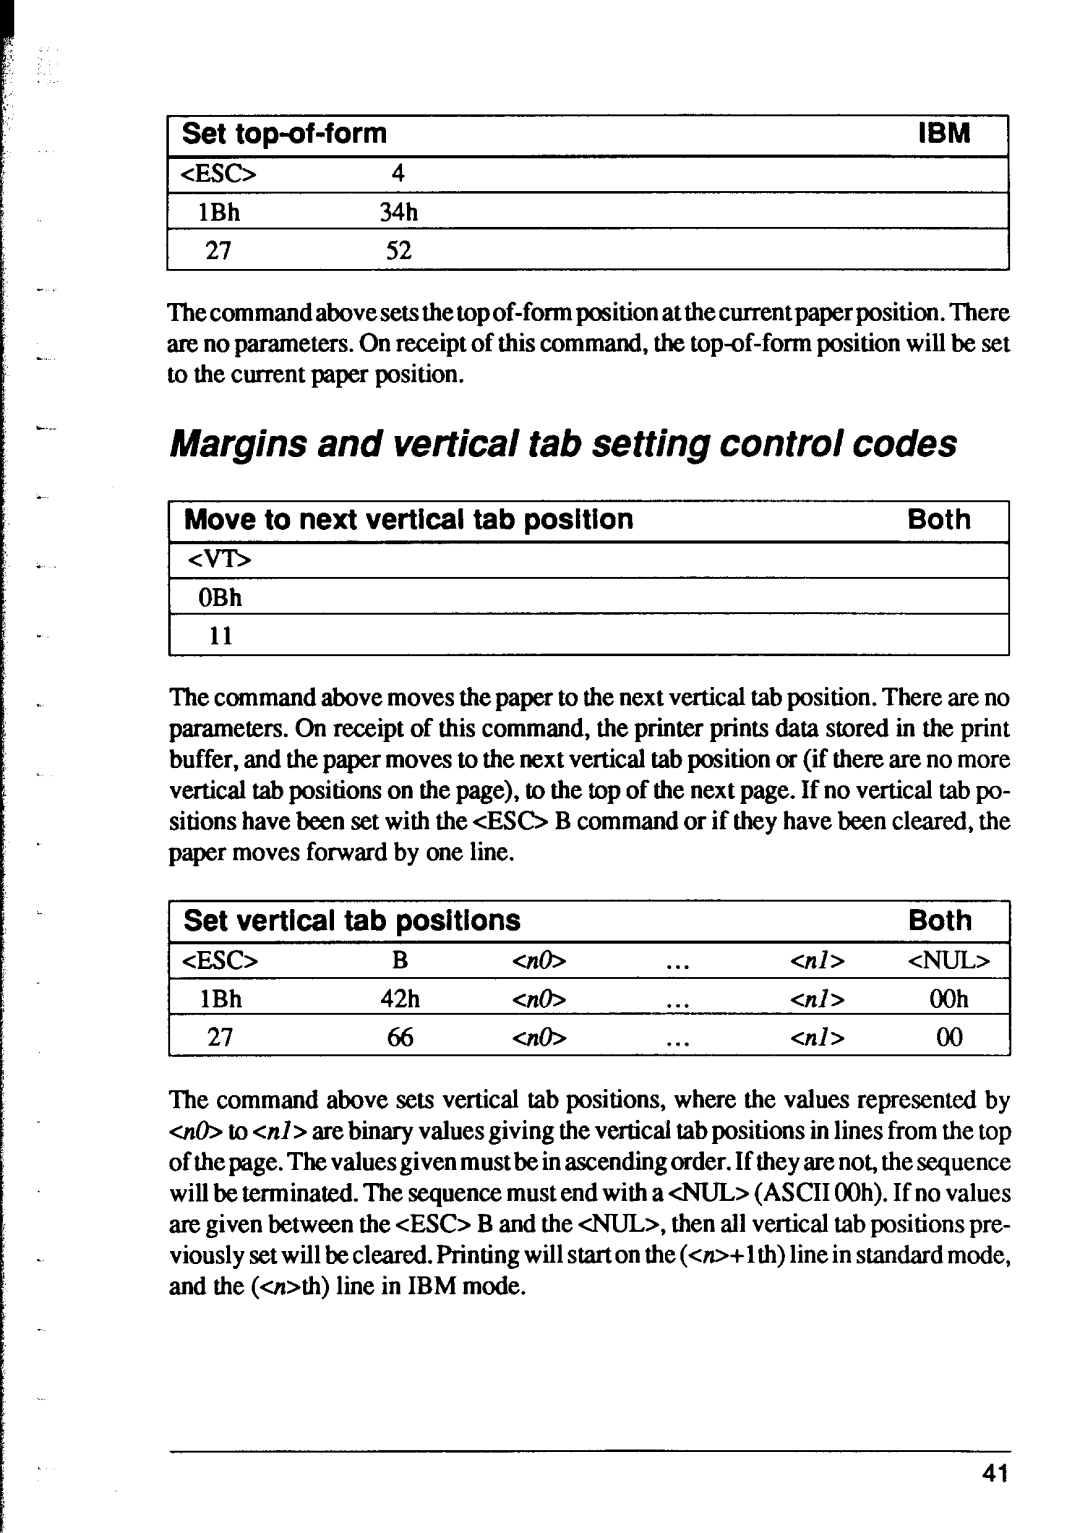 Star Micronics XR-1000 Margins and vertical tab setting control codes, Set top-of-form, I Vt, 1Set vertical tab positions 